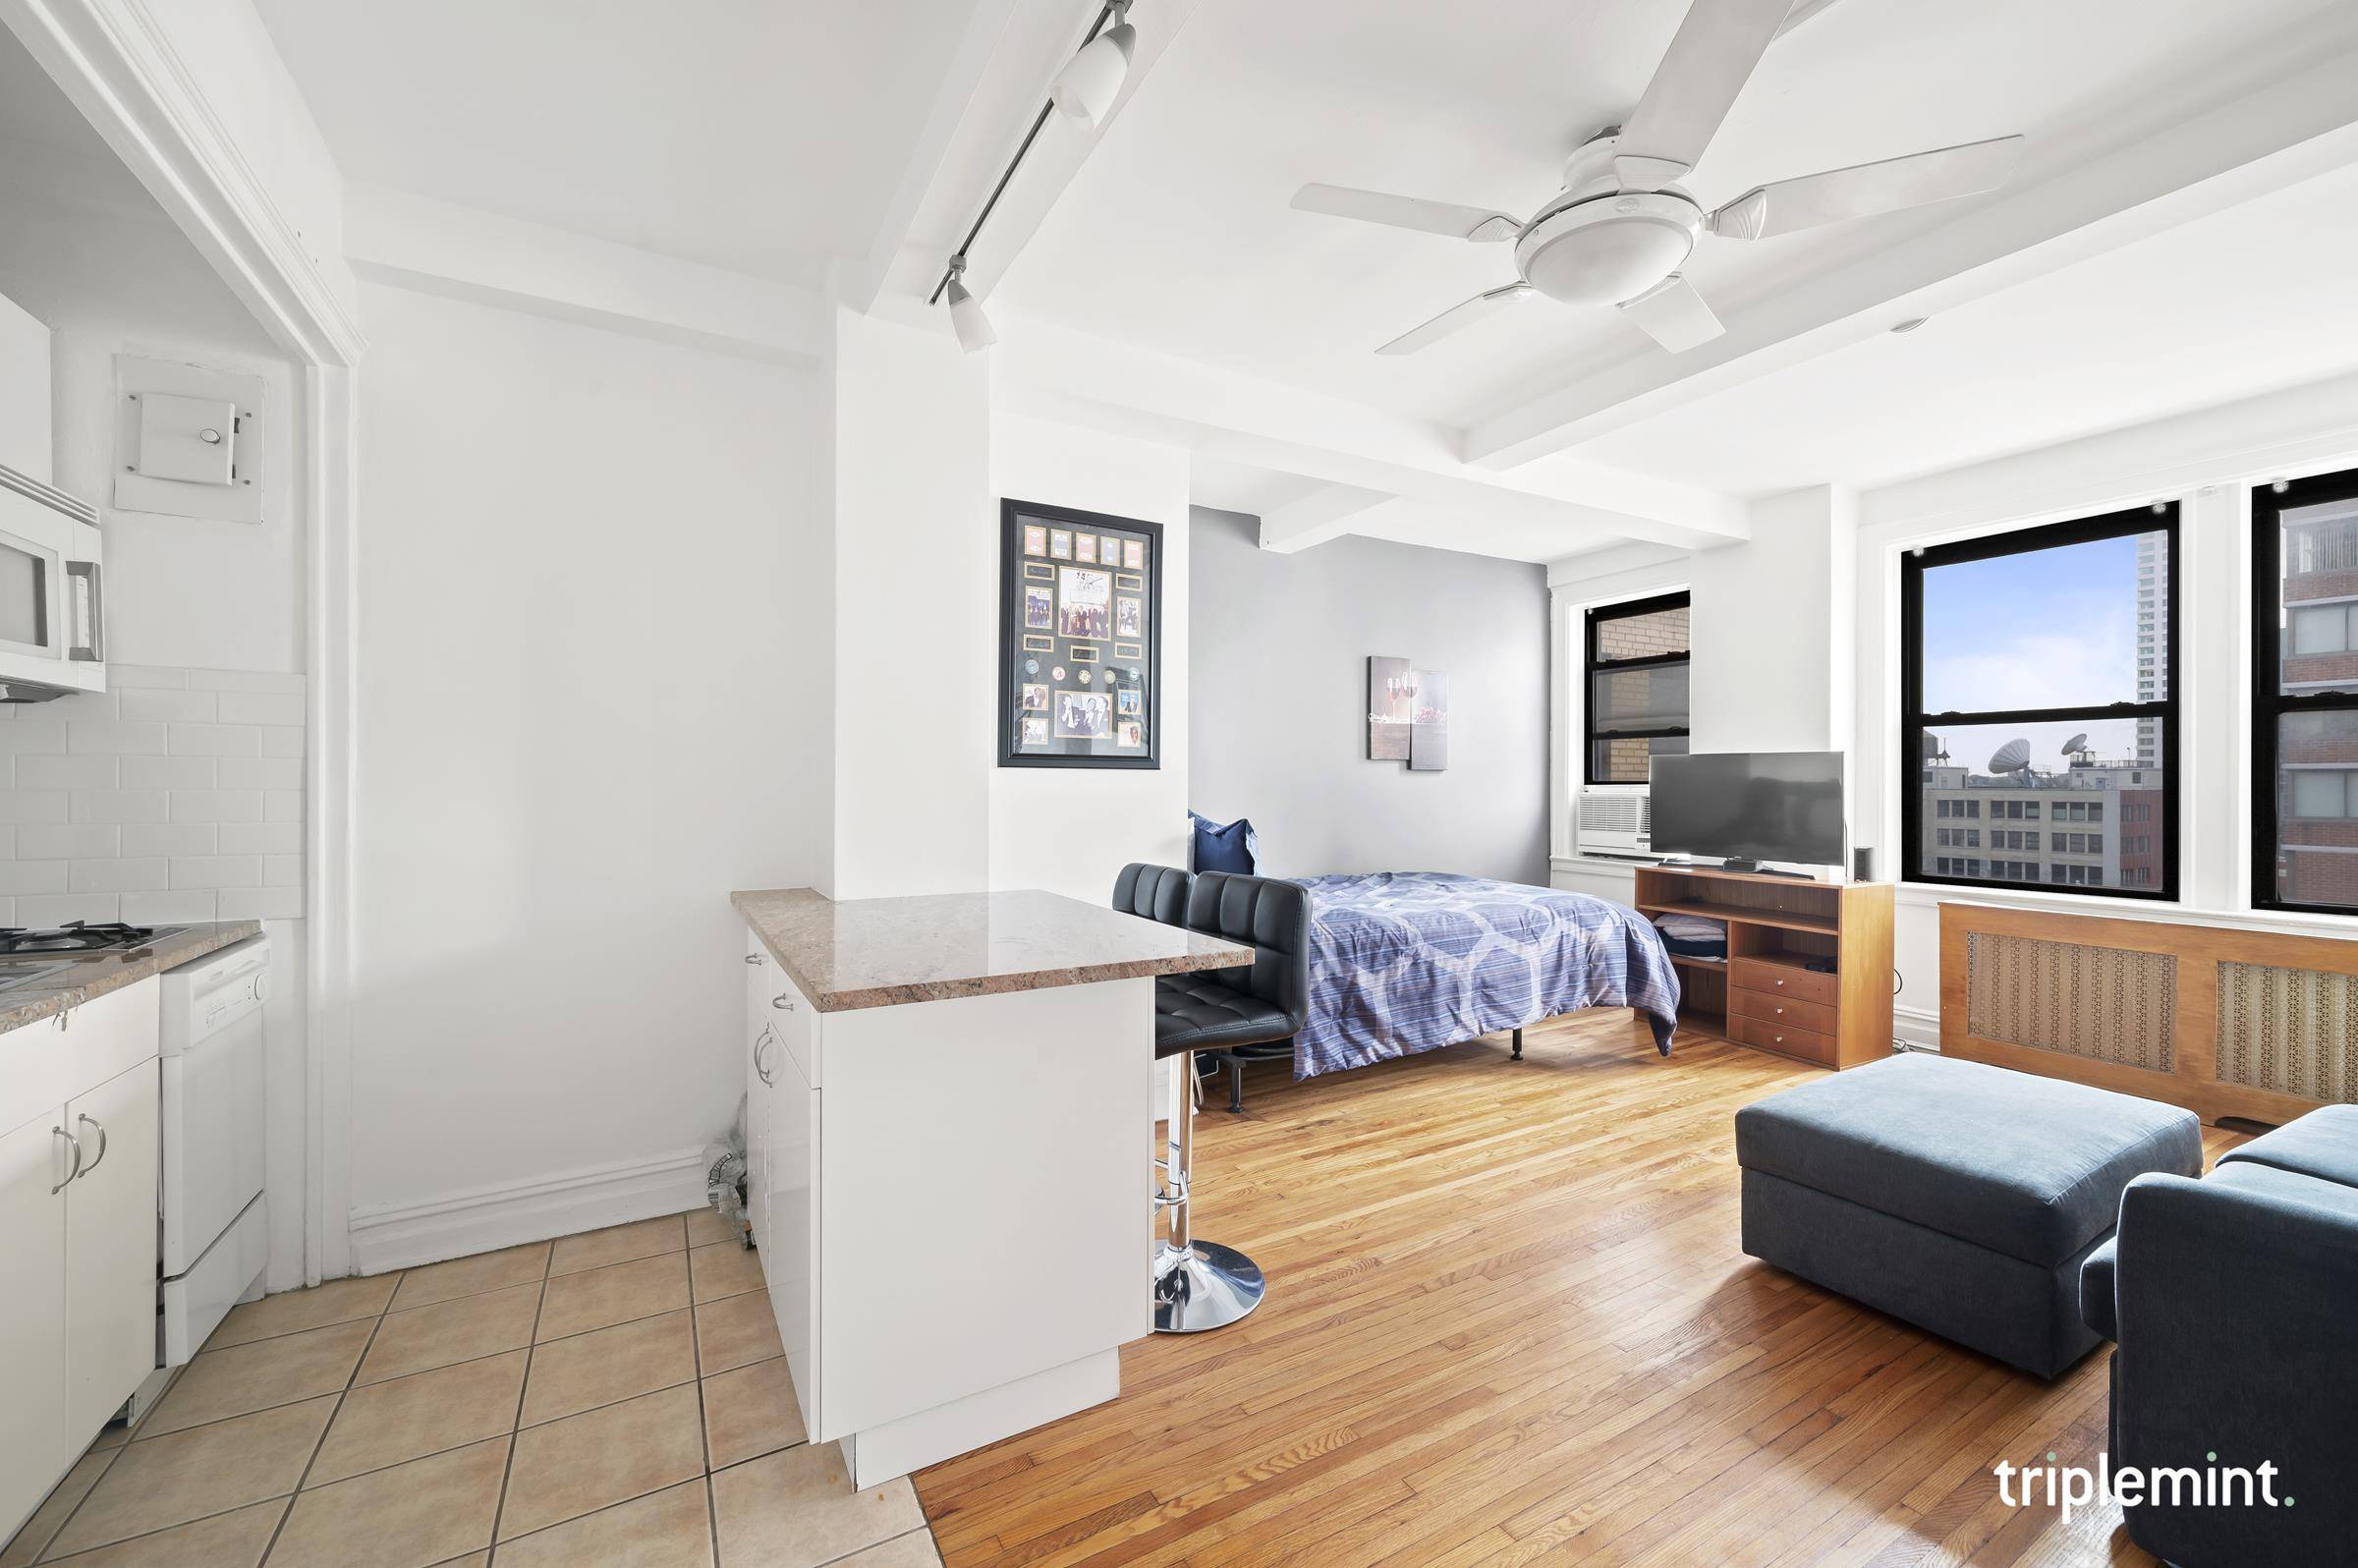 Come see this spacious, light filled alcove studio with spectacular views in Midtown West !